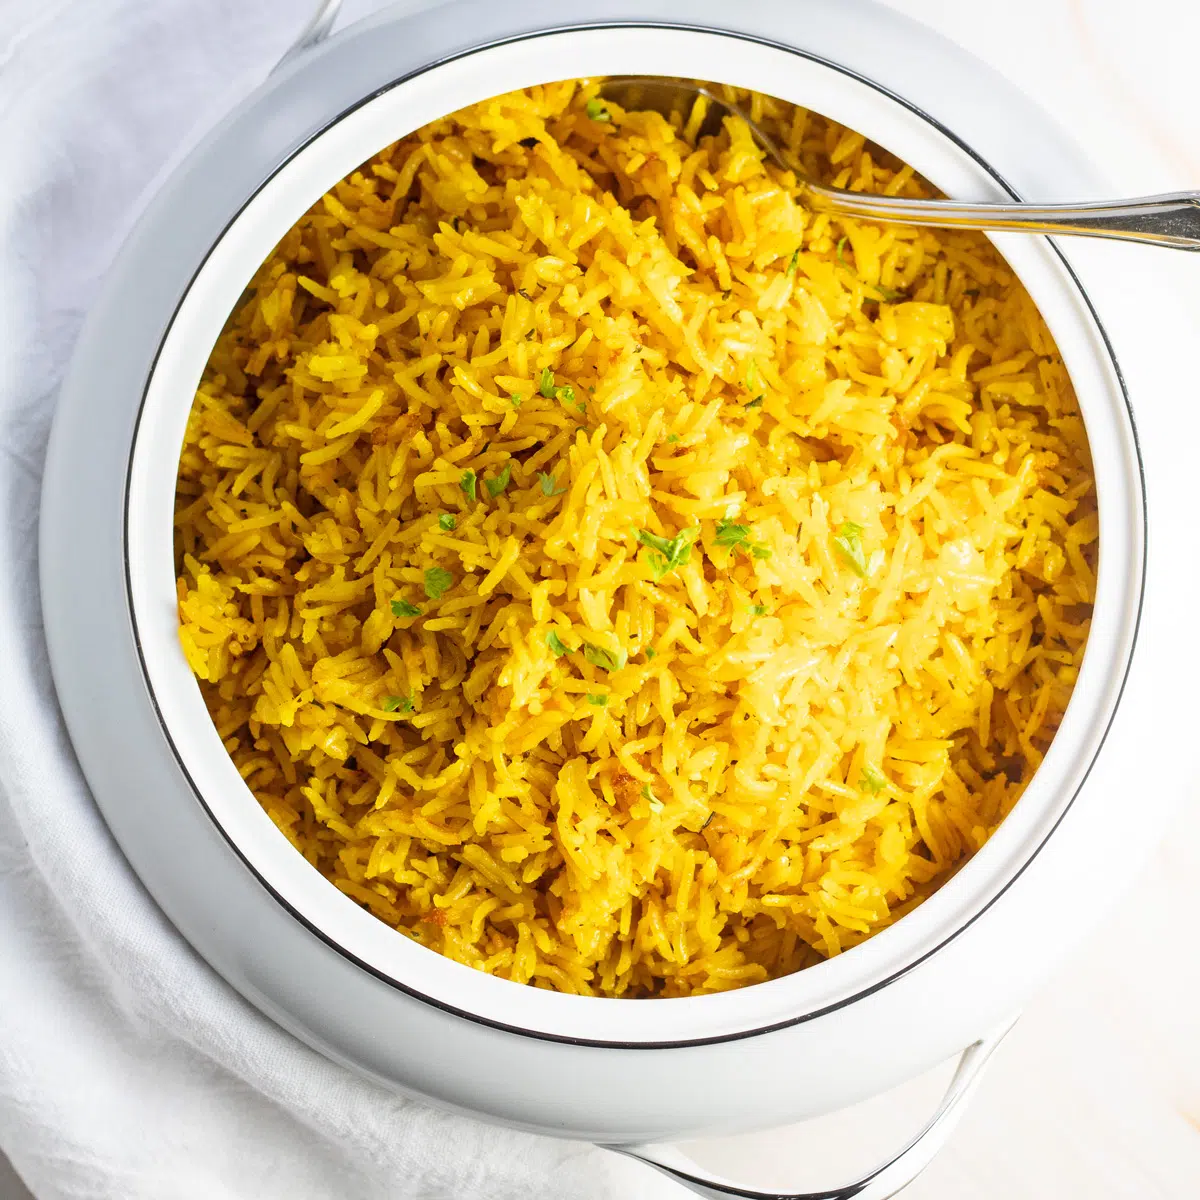 Turmeric rice in serving dish on light background.